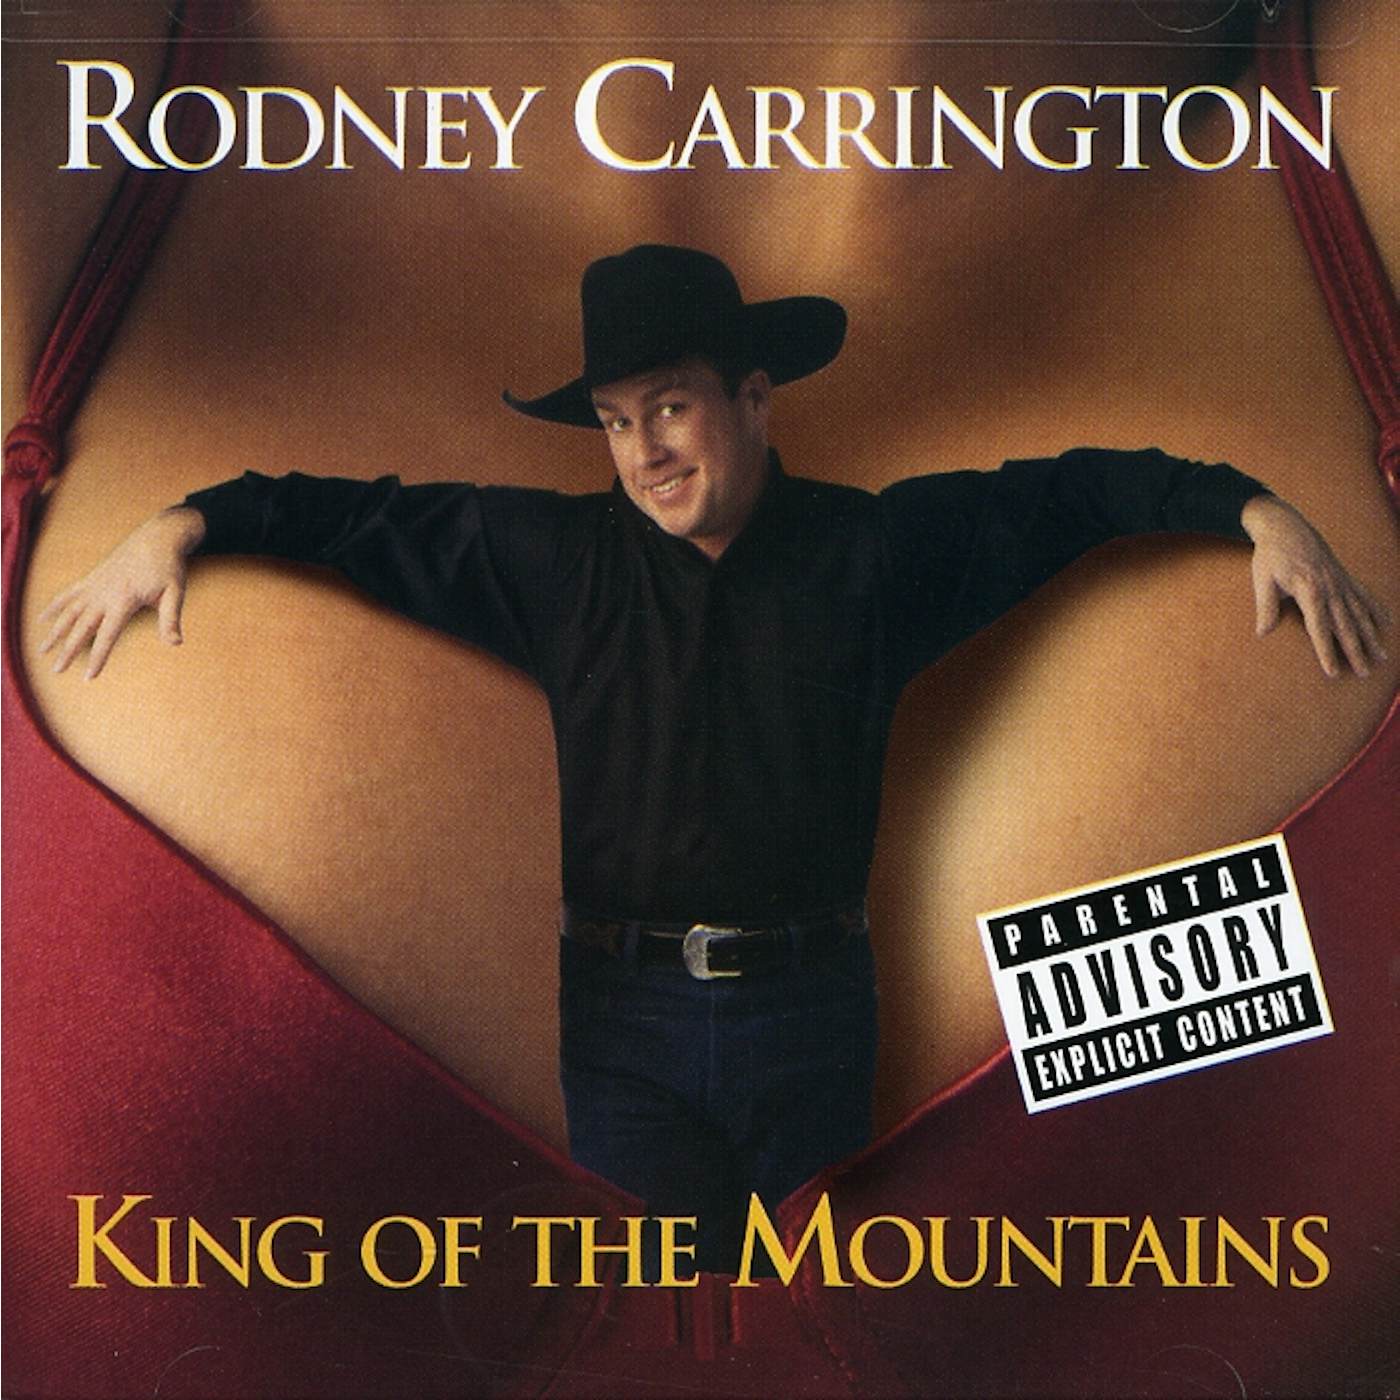 Rodney Carrington KING OF THE MOUNTAINS CD